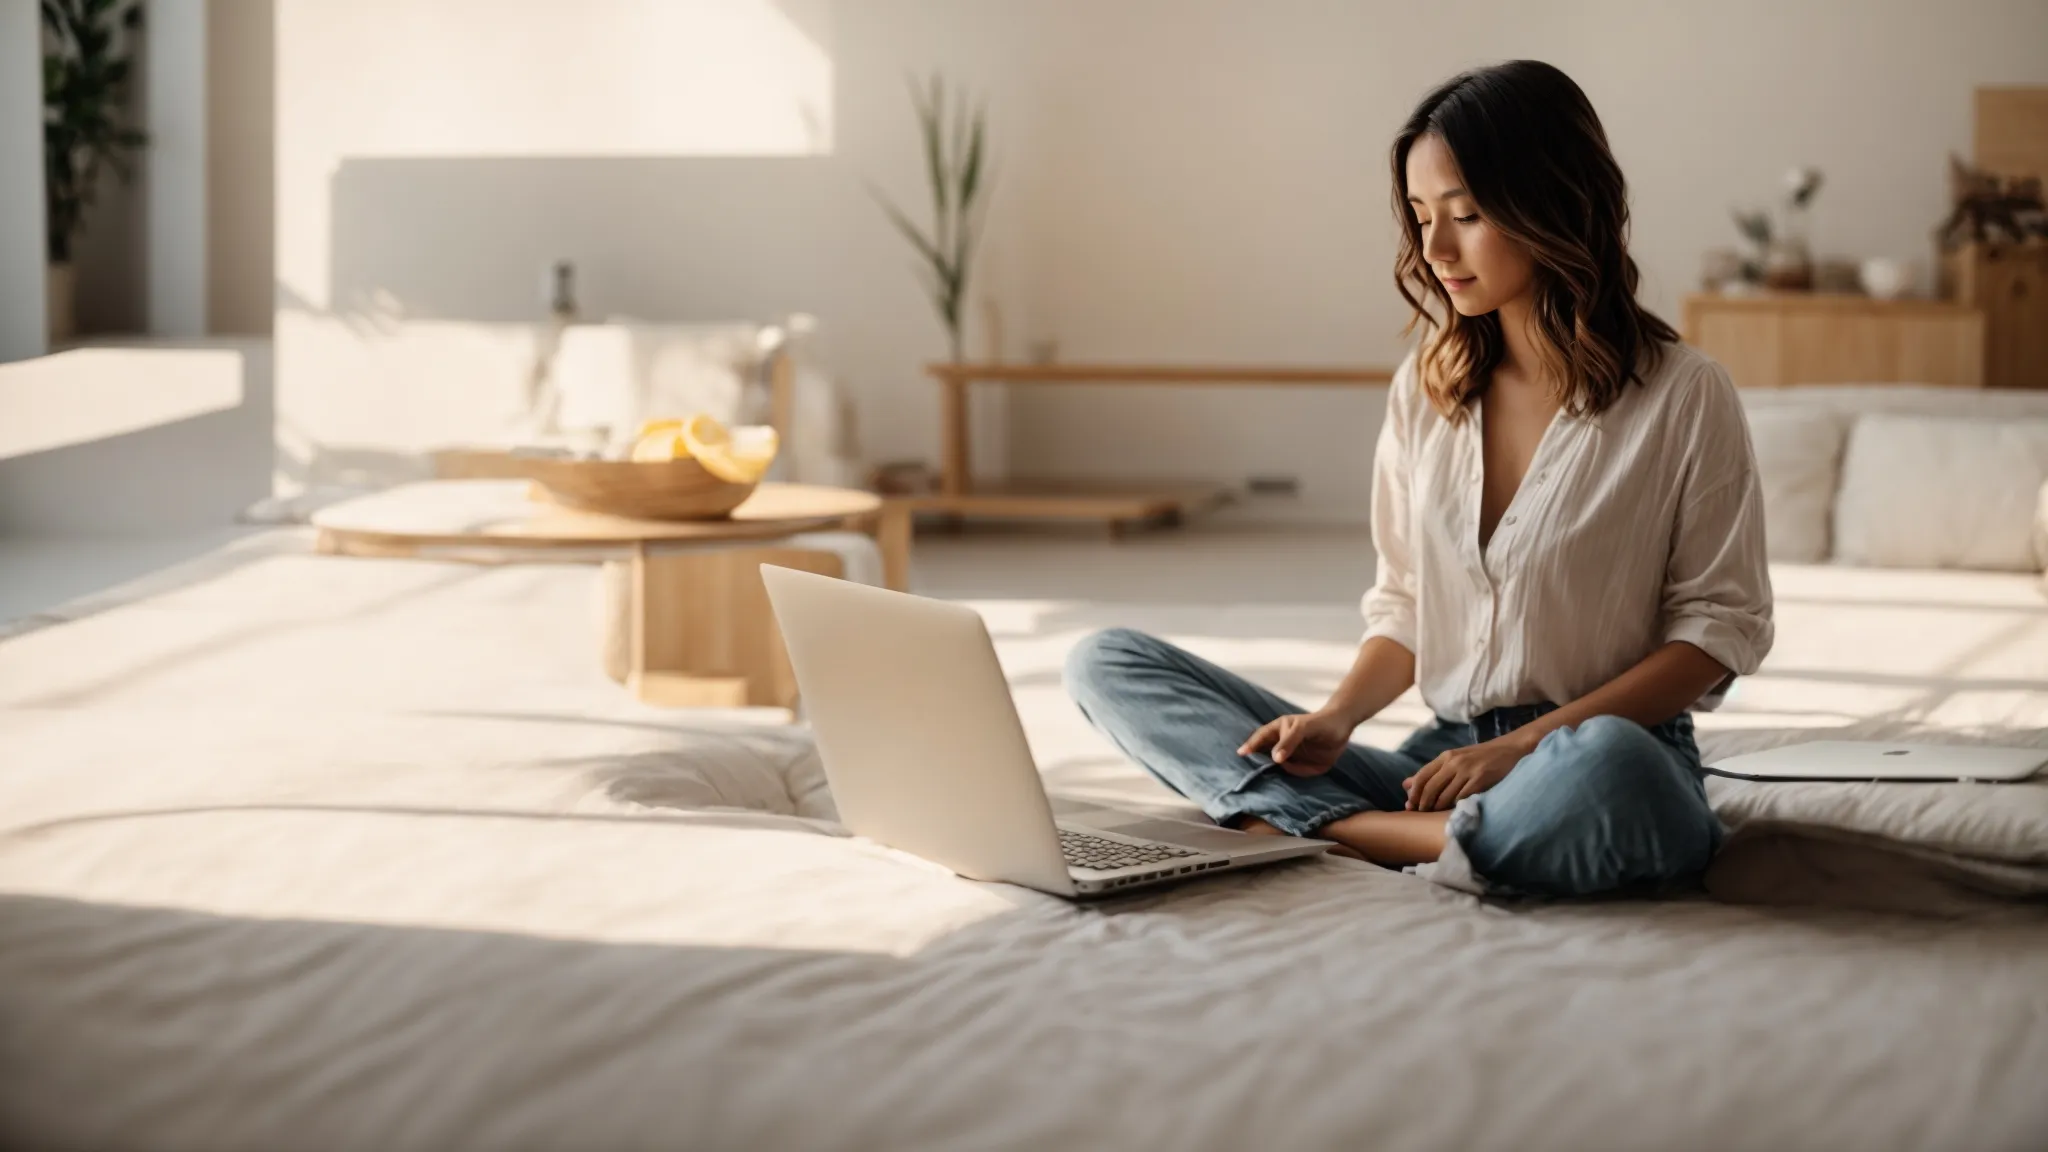 a person sitting comfortably with a laptop in a spacious, sunlit room, symbolizing the freedom and flexibility of freelancing.